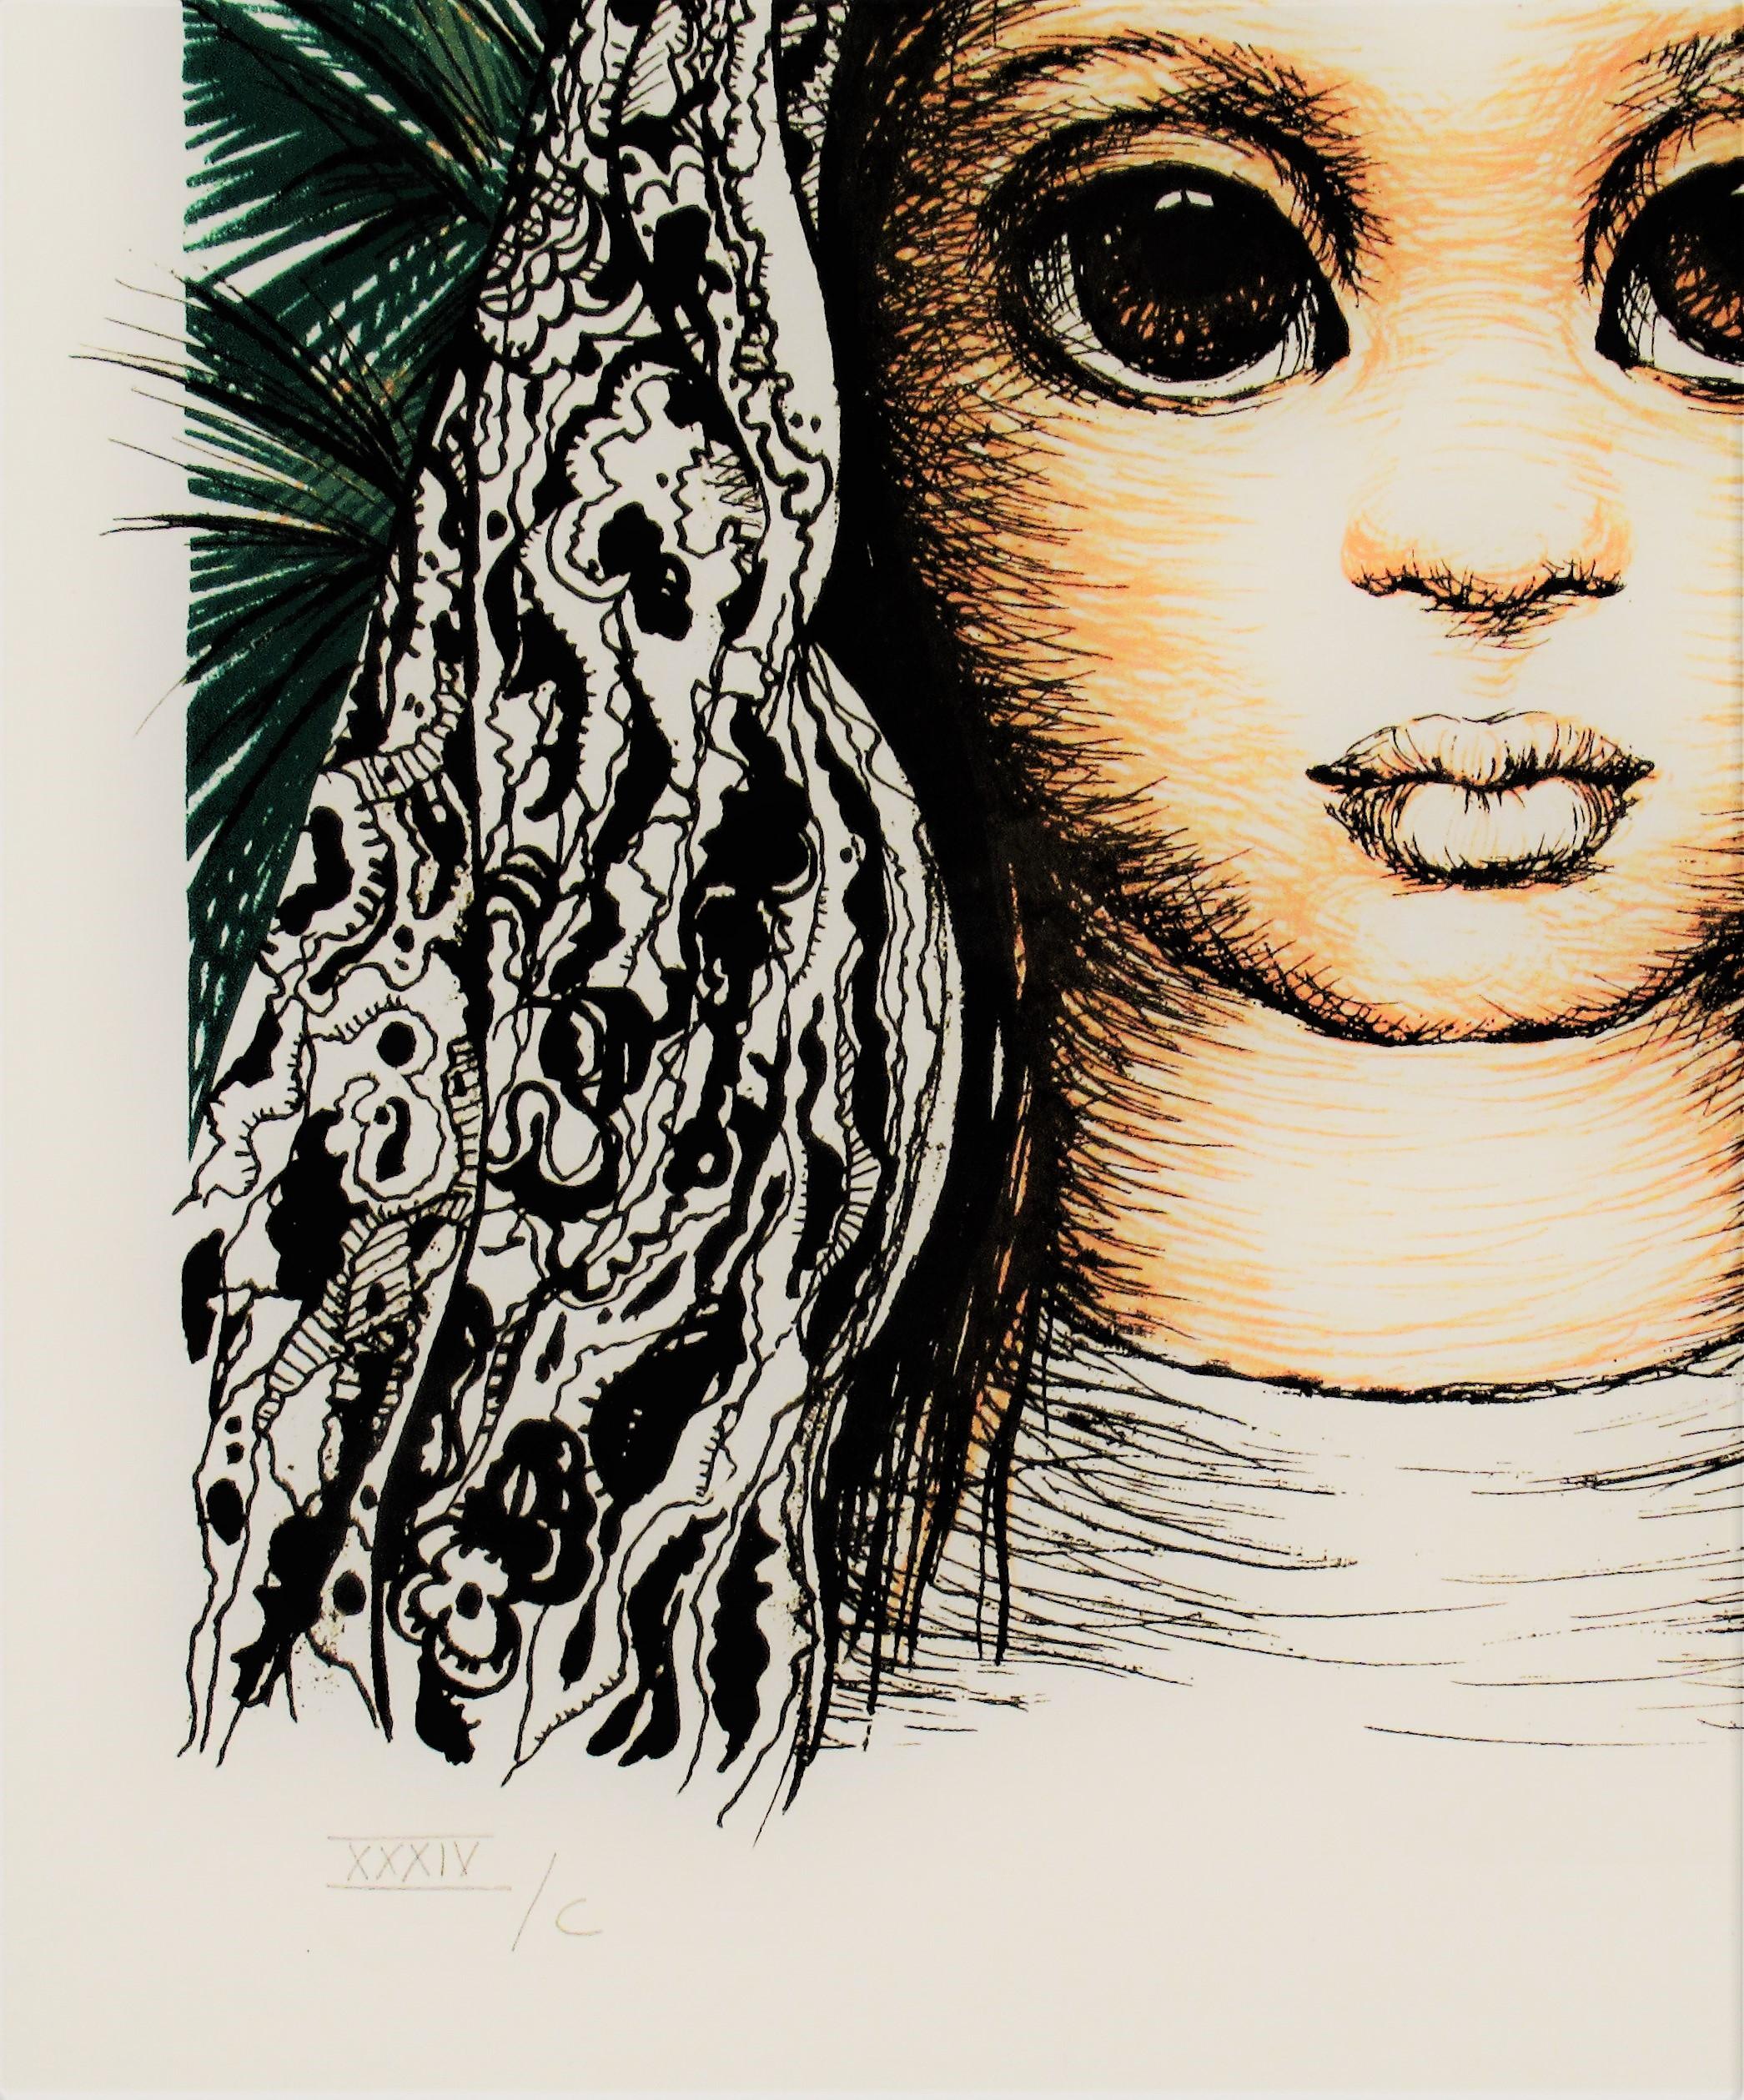 San Francisco, Girl with Mission Dolores - American Realist Print by Margaret Keane